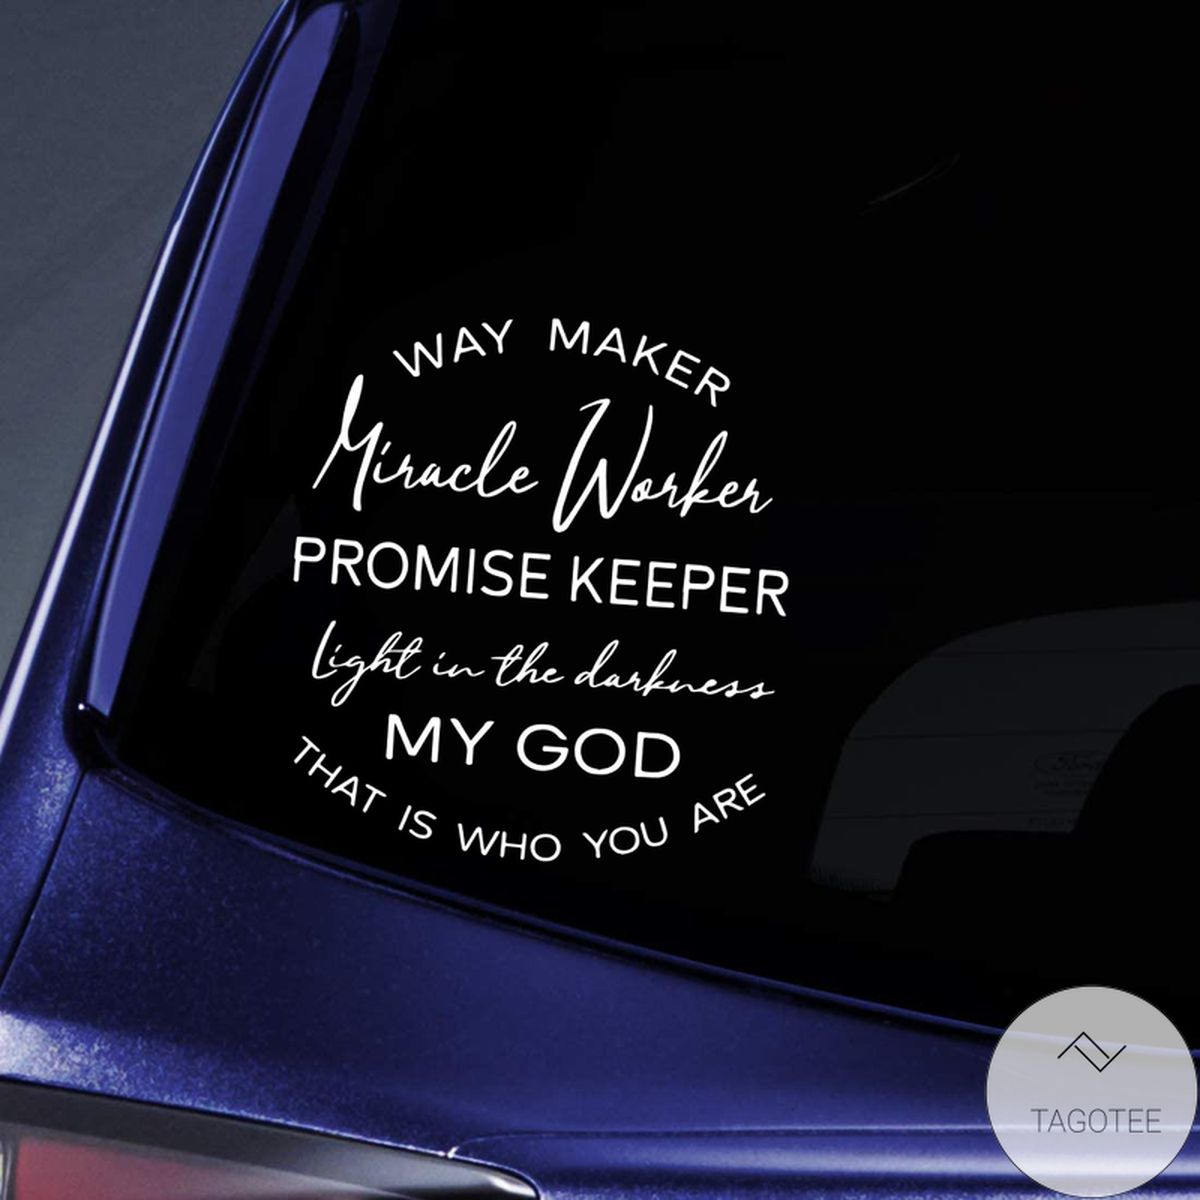 Way Maker Miracle Worker Promise Keeper Light In The Darkness God Sticker Decal